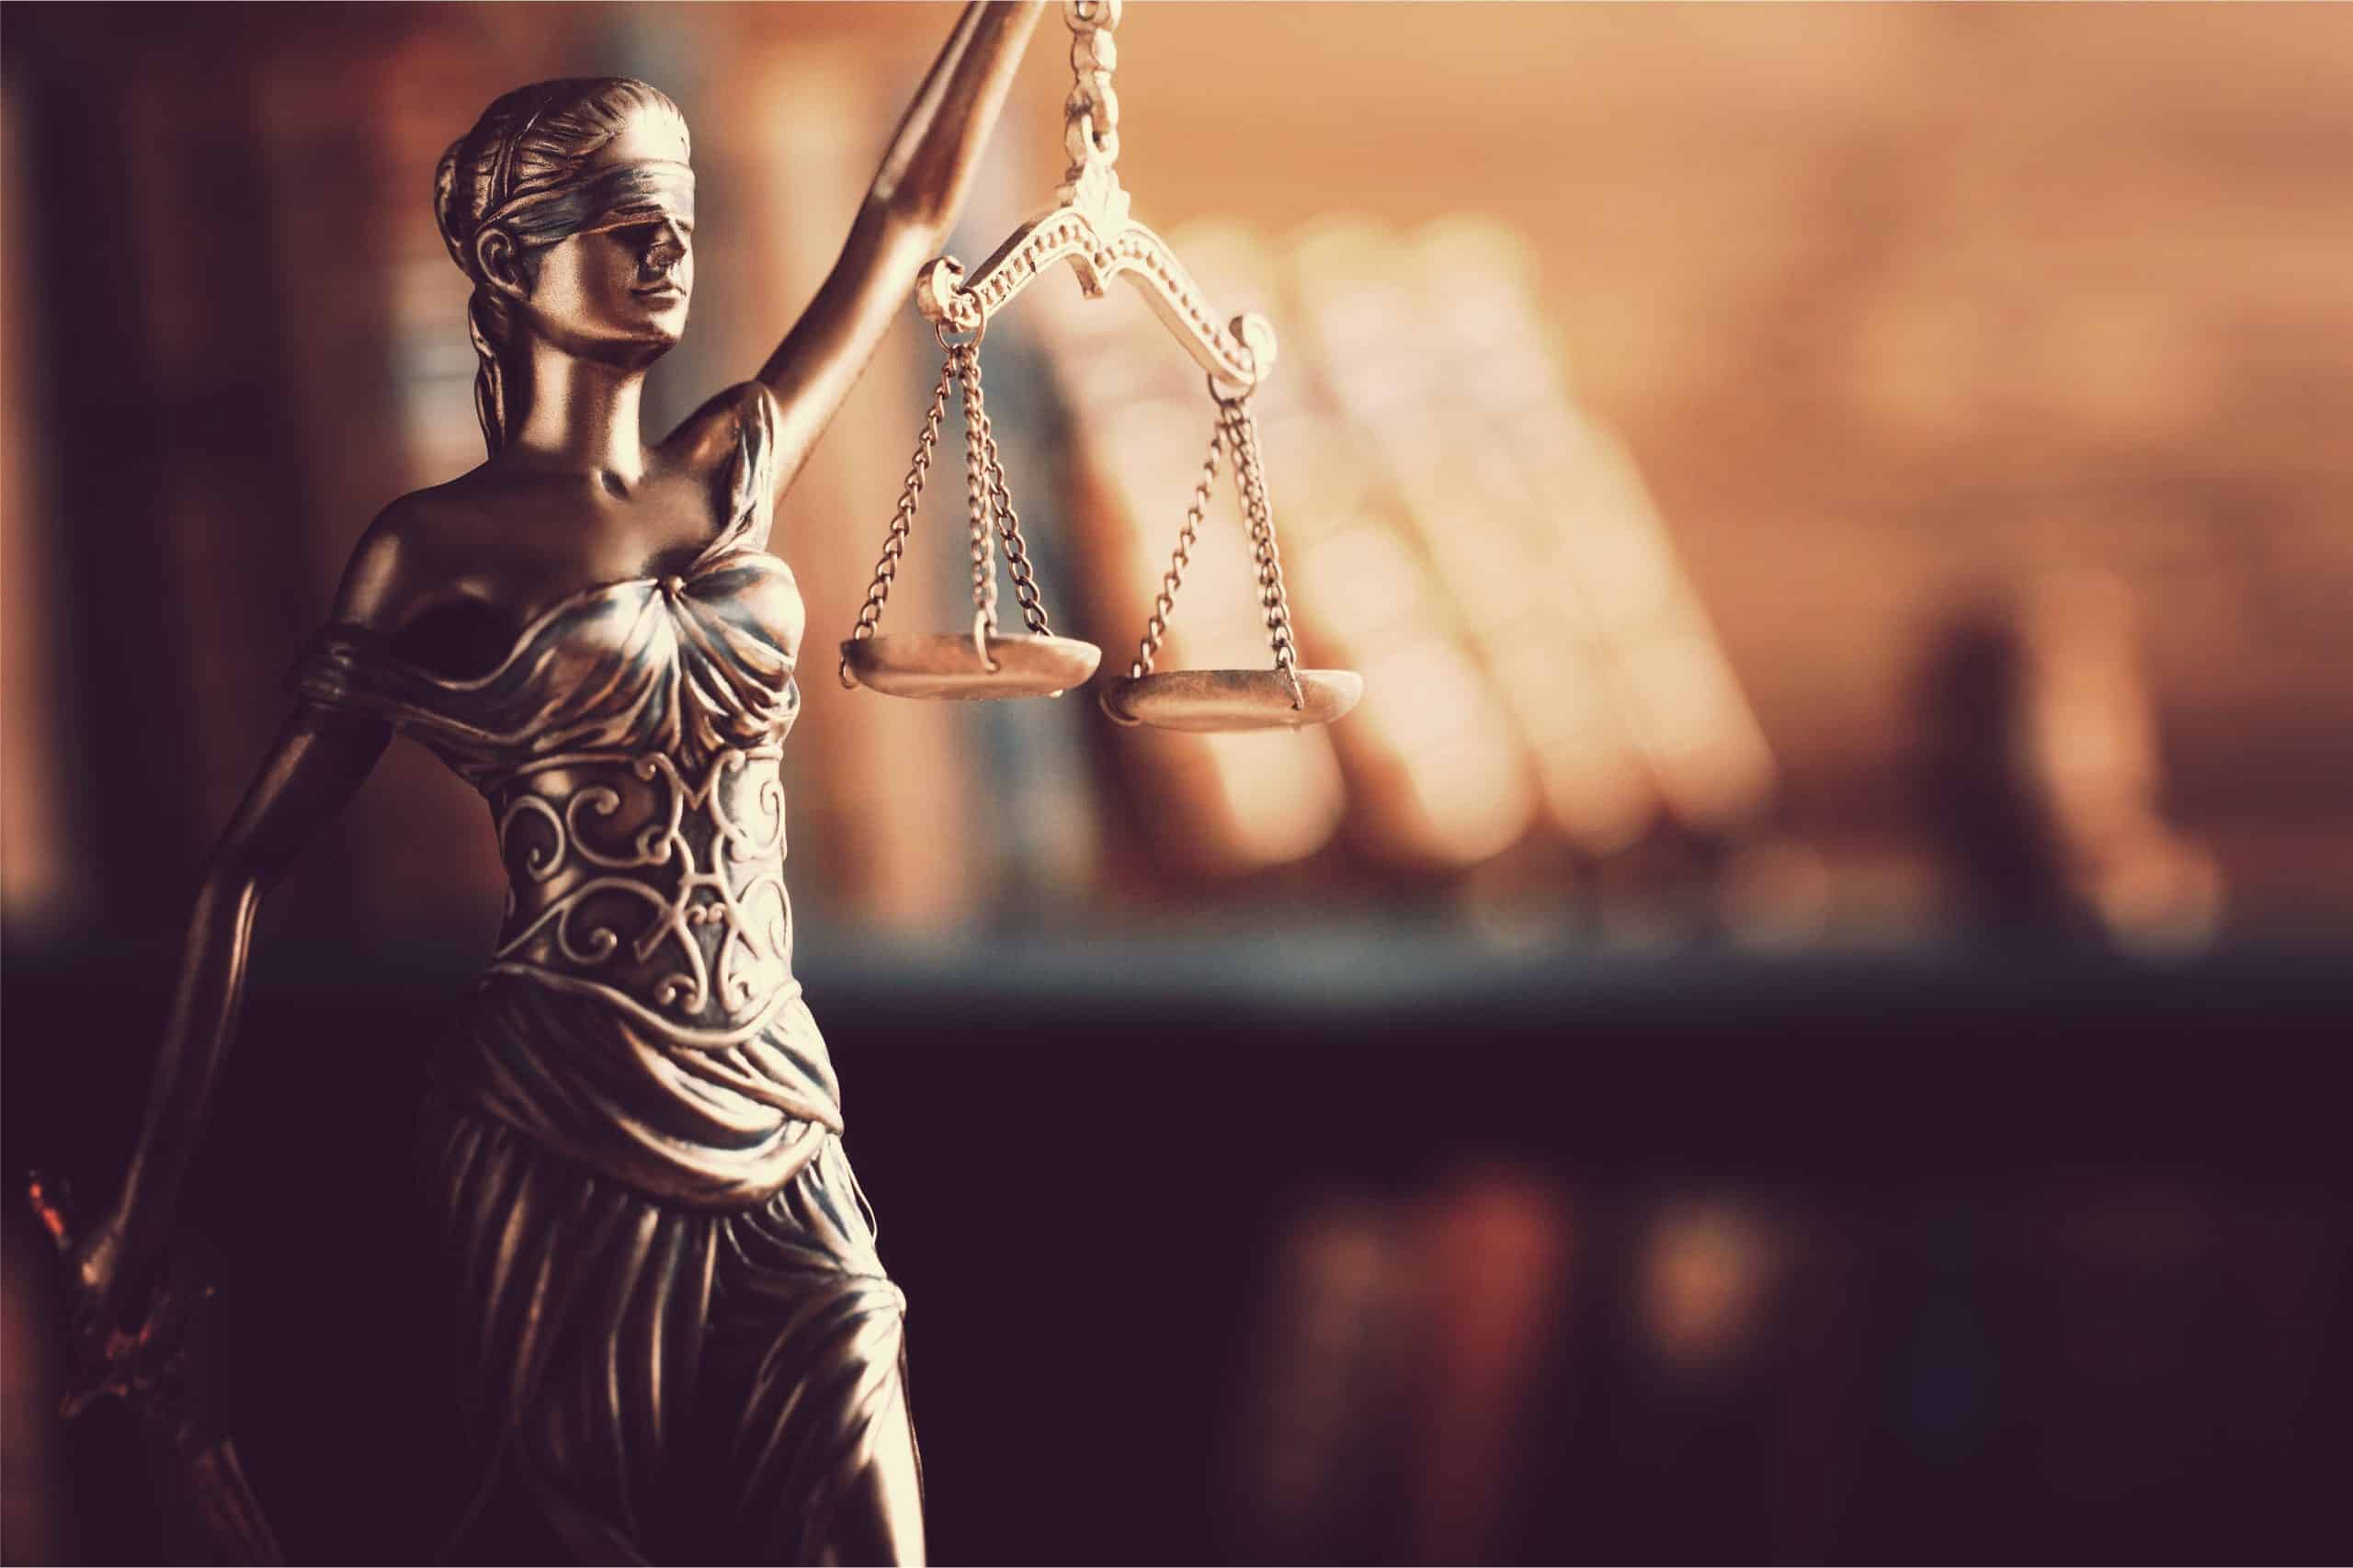 Lady Justice holding the scales of justice